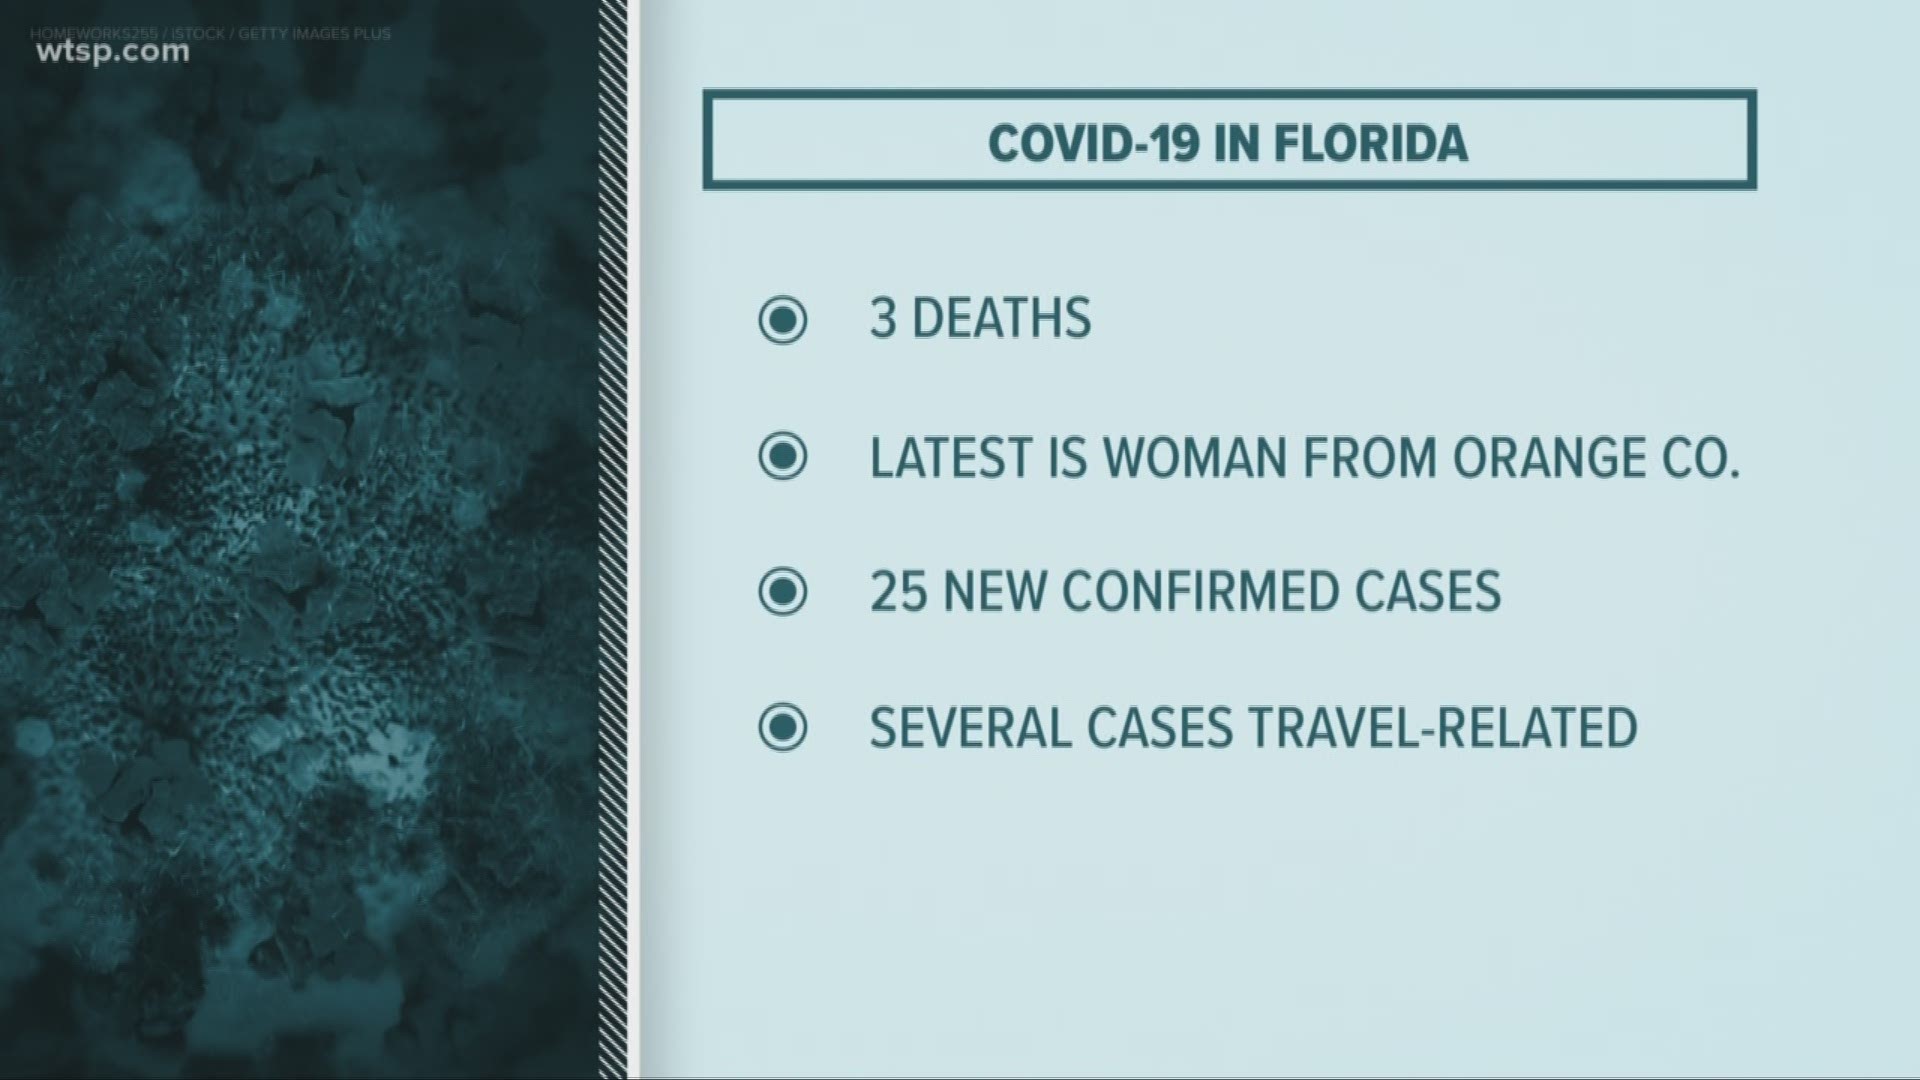 A third person from Florida has died after being sickened by the new coronavirus, COVID-19.